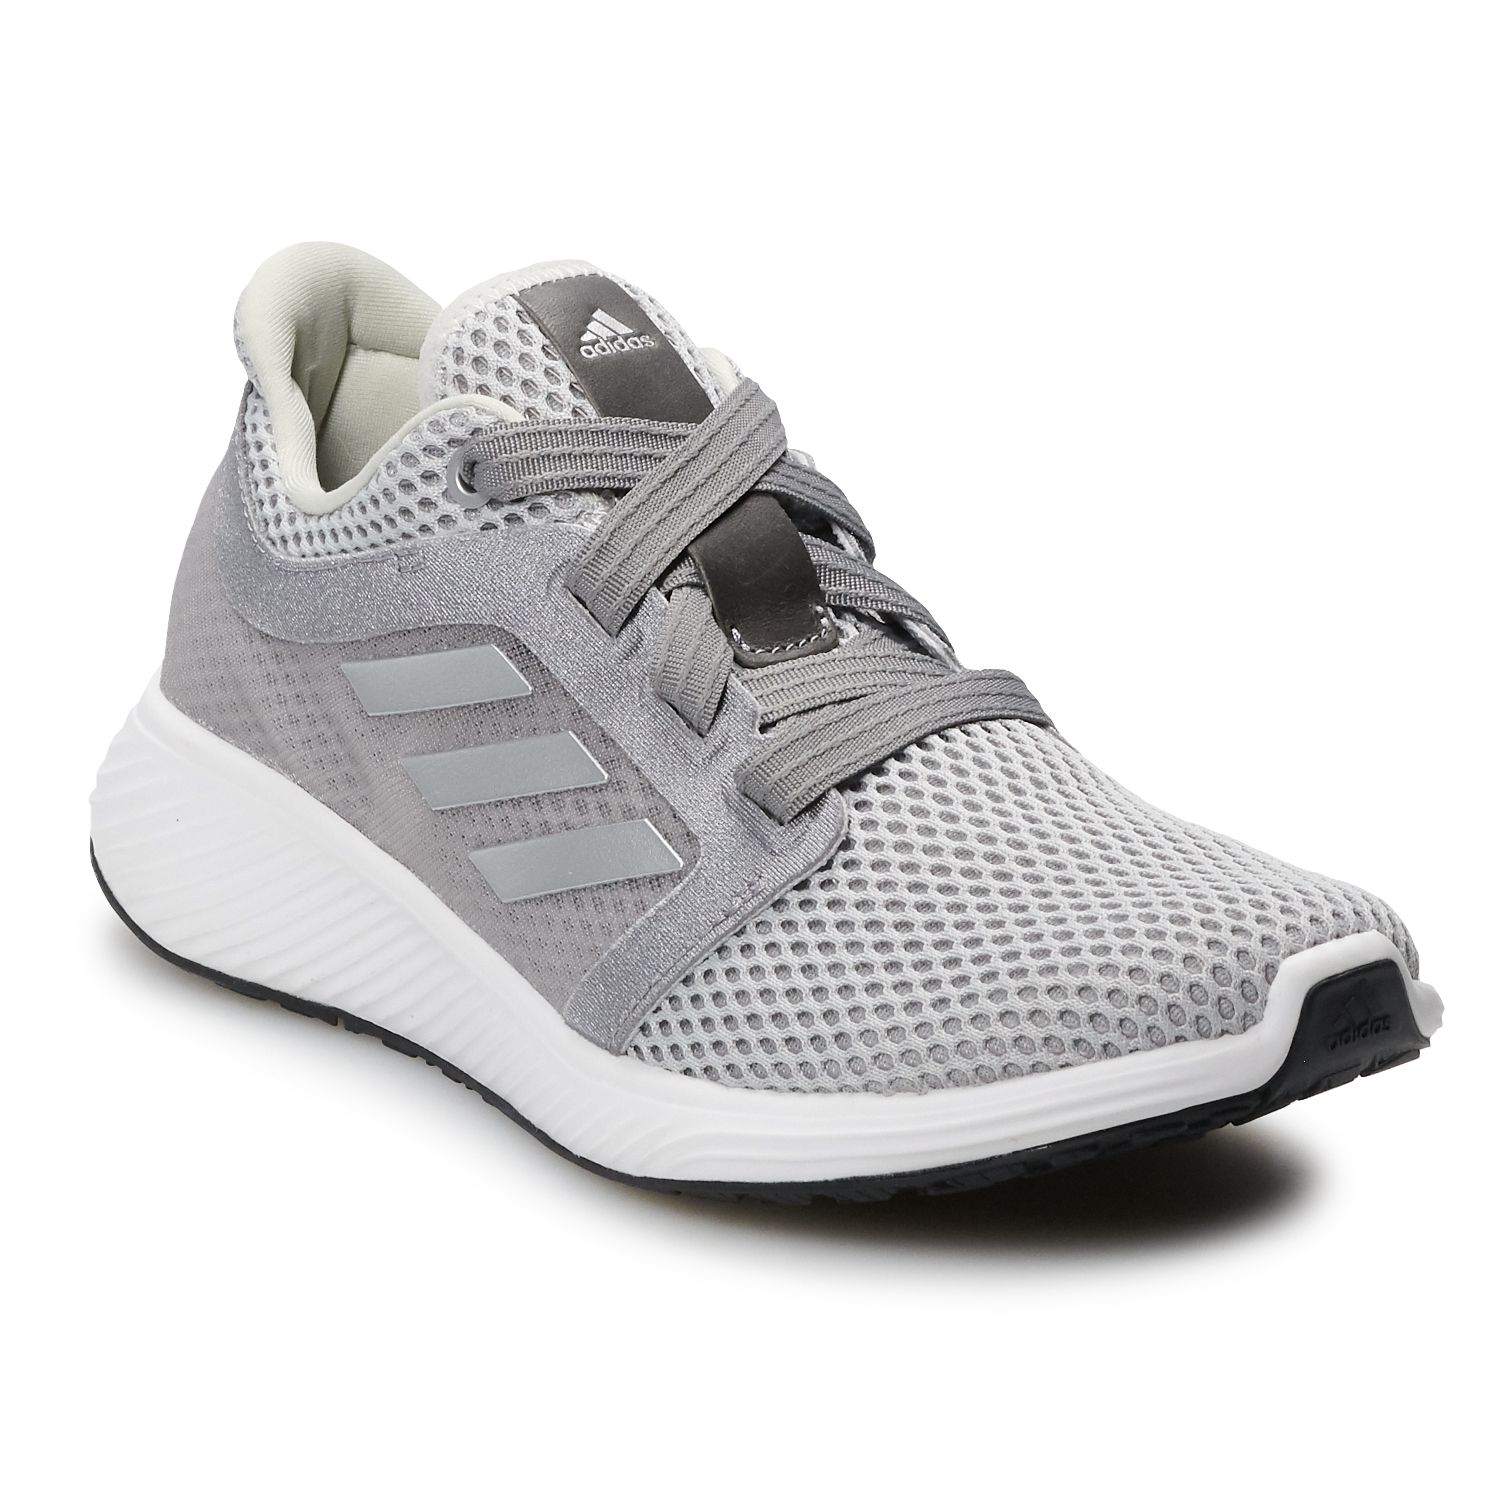 adidas edge lux 3 women's running shoes